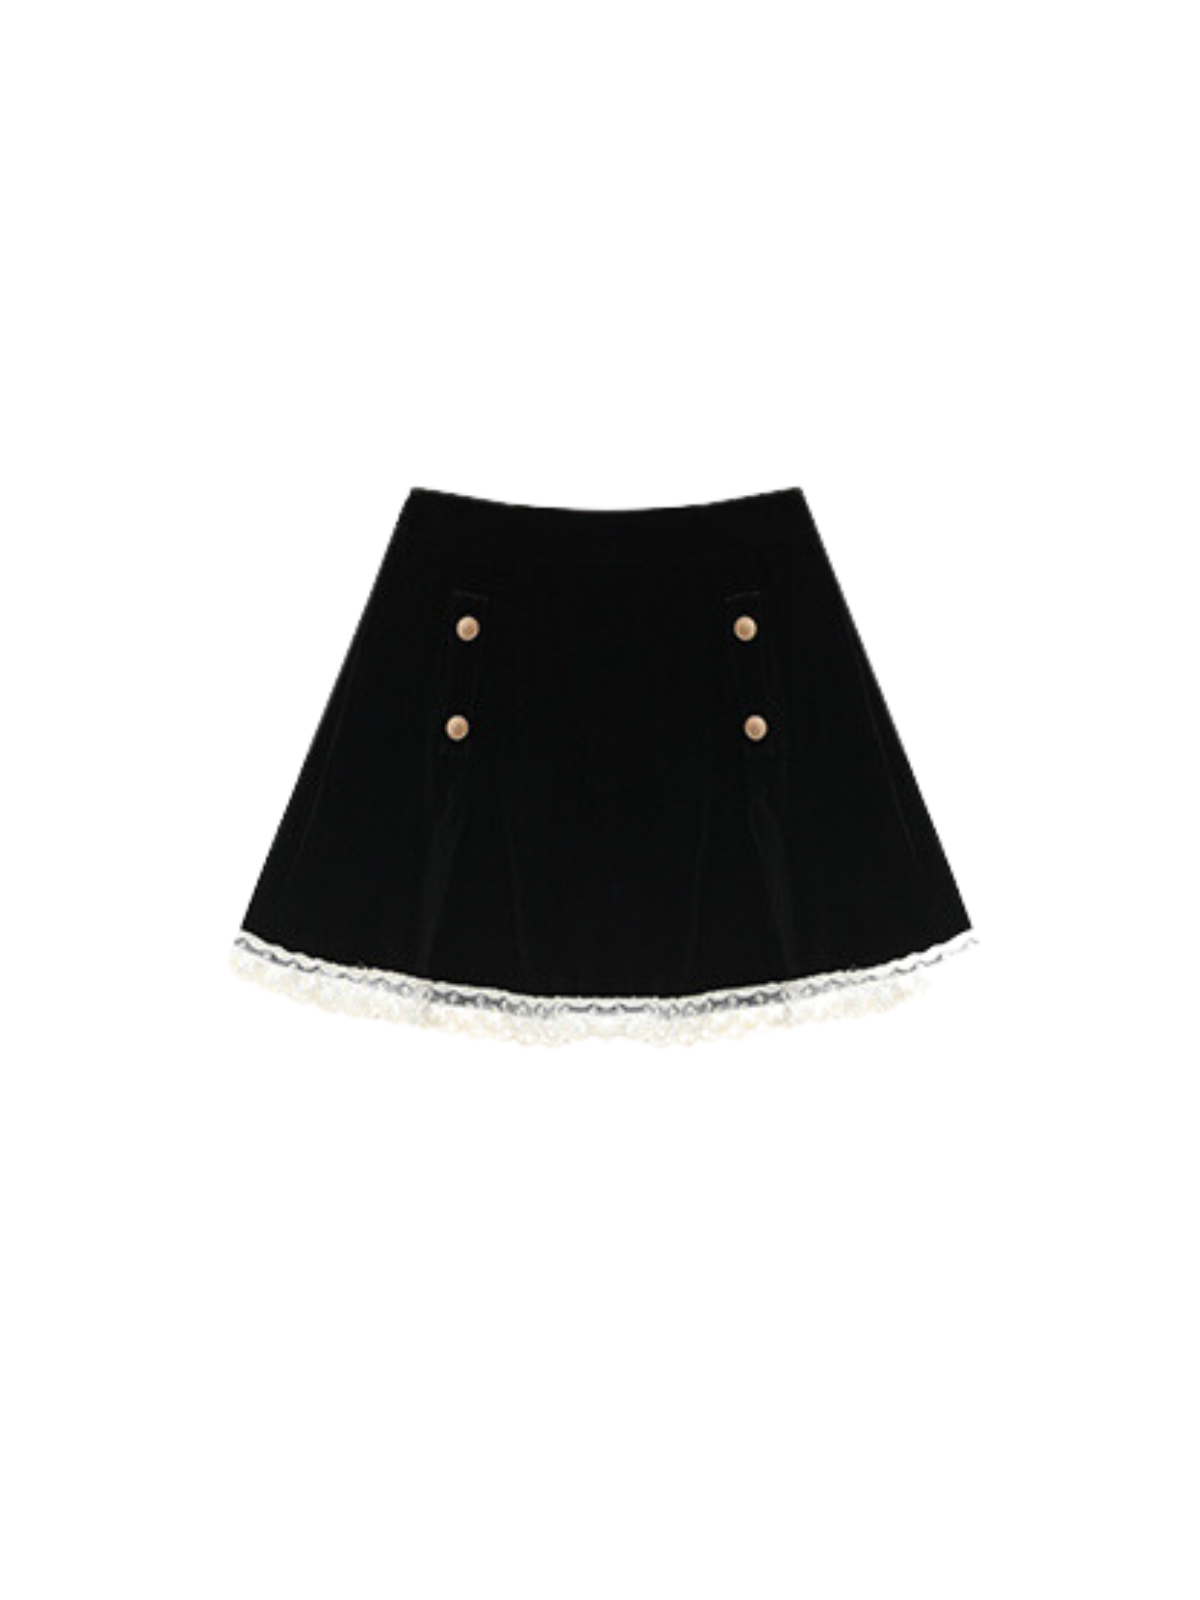 French gold button best + lace skirt